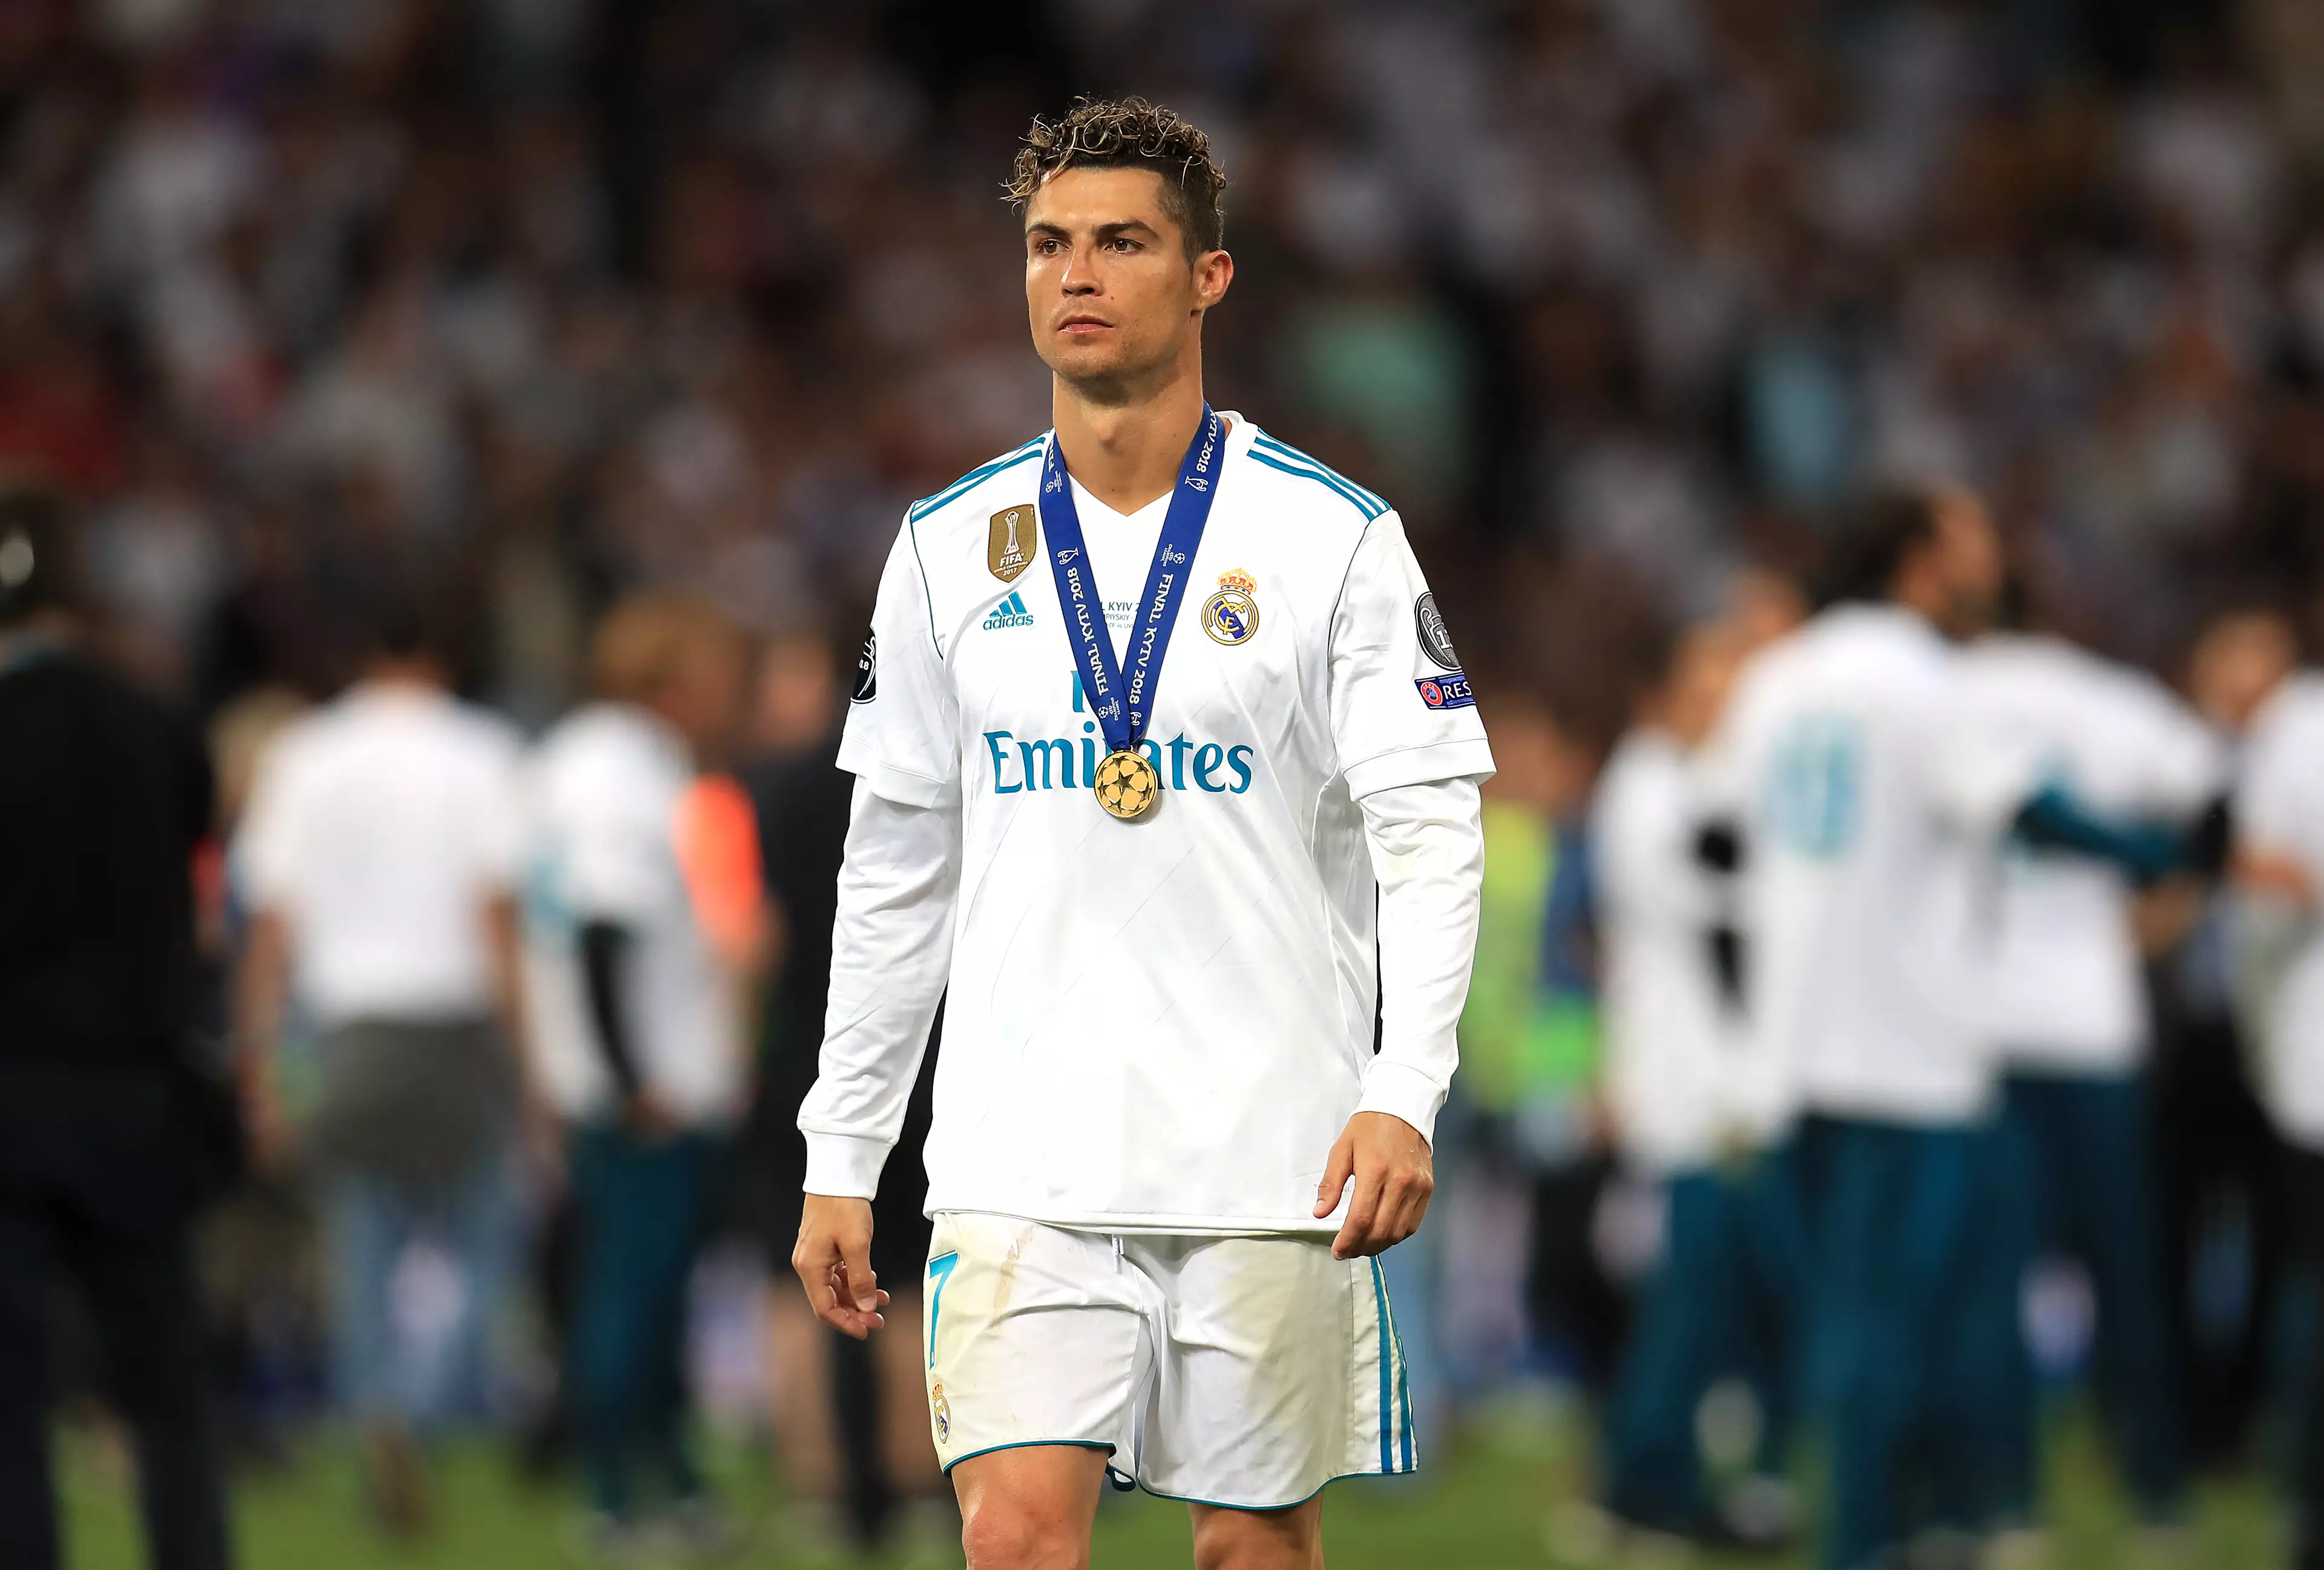 Ronaldo wasn't as happy as he might have been after the Champions League win. Image: PA Images